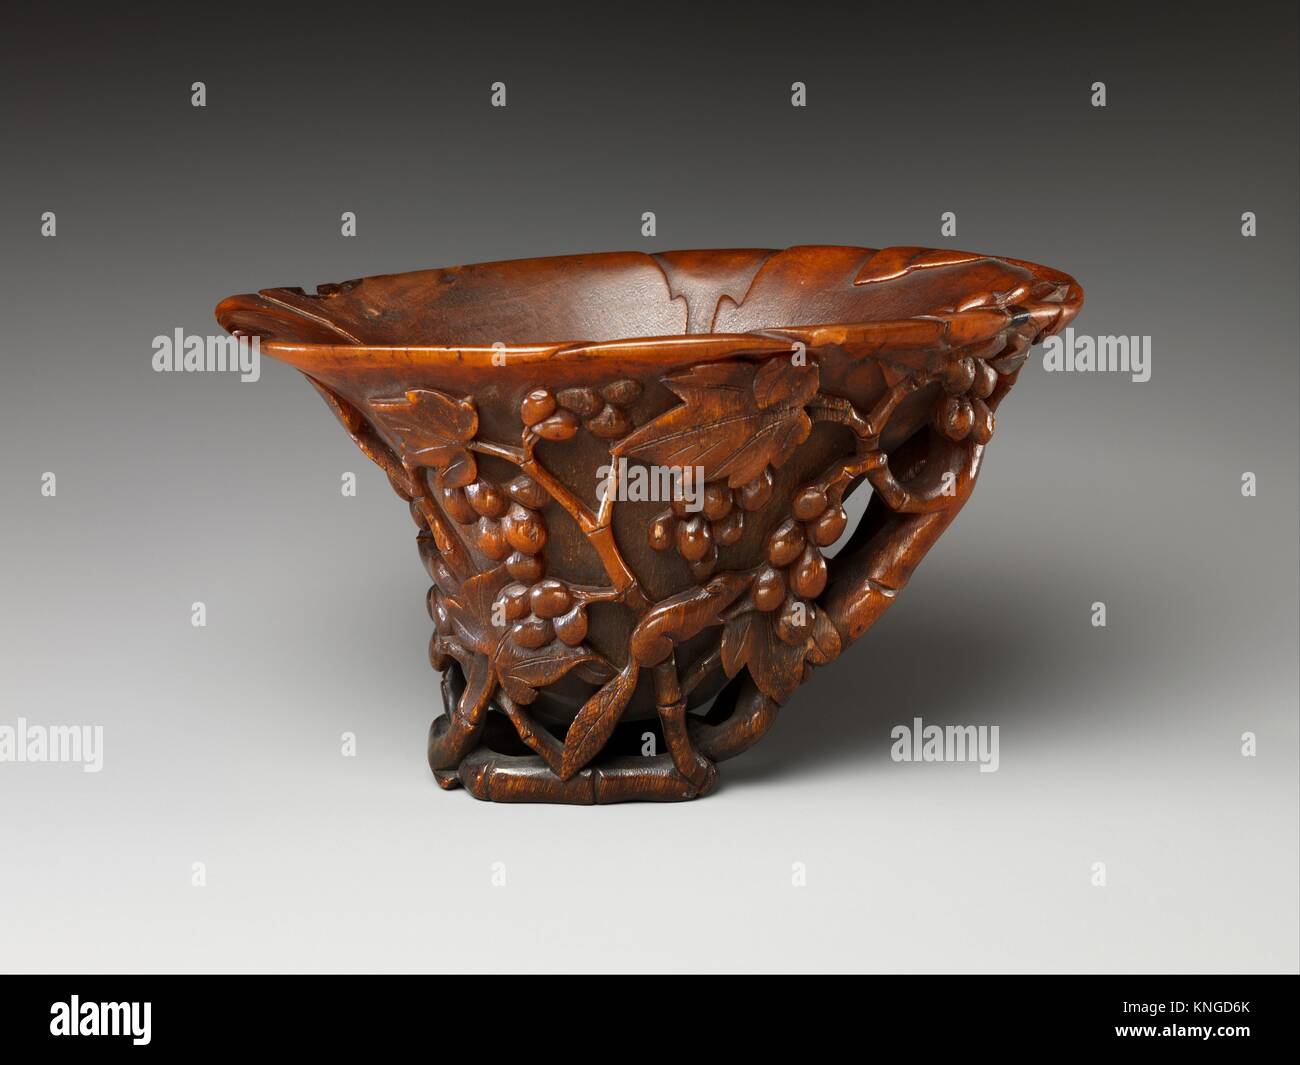 Cup with grapes. Period: Ming (1368-1644) to Qing (1644-1911) dynasty; Date: early 17th century; Culture: China; Medium: Rhinoceros horn; Dimensions: Stock Photo